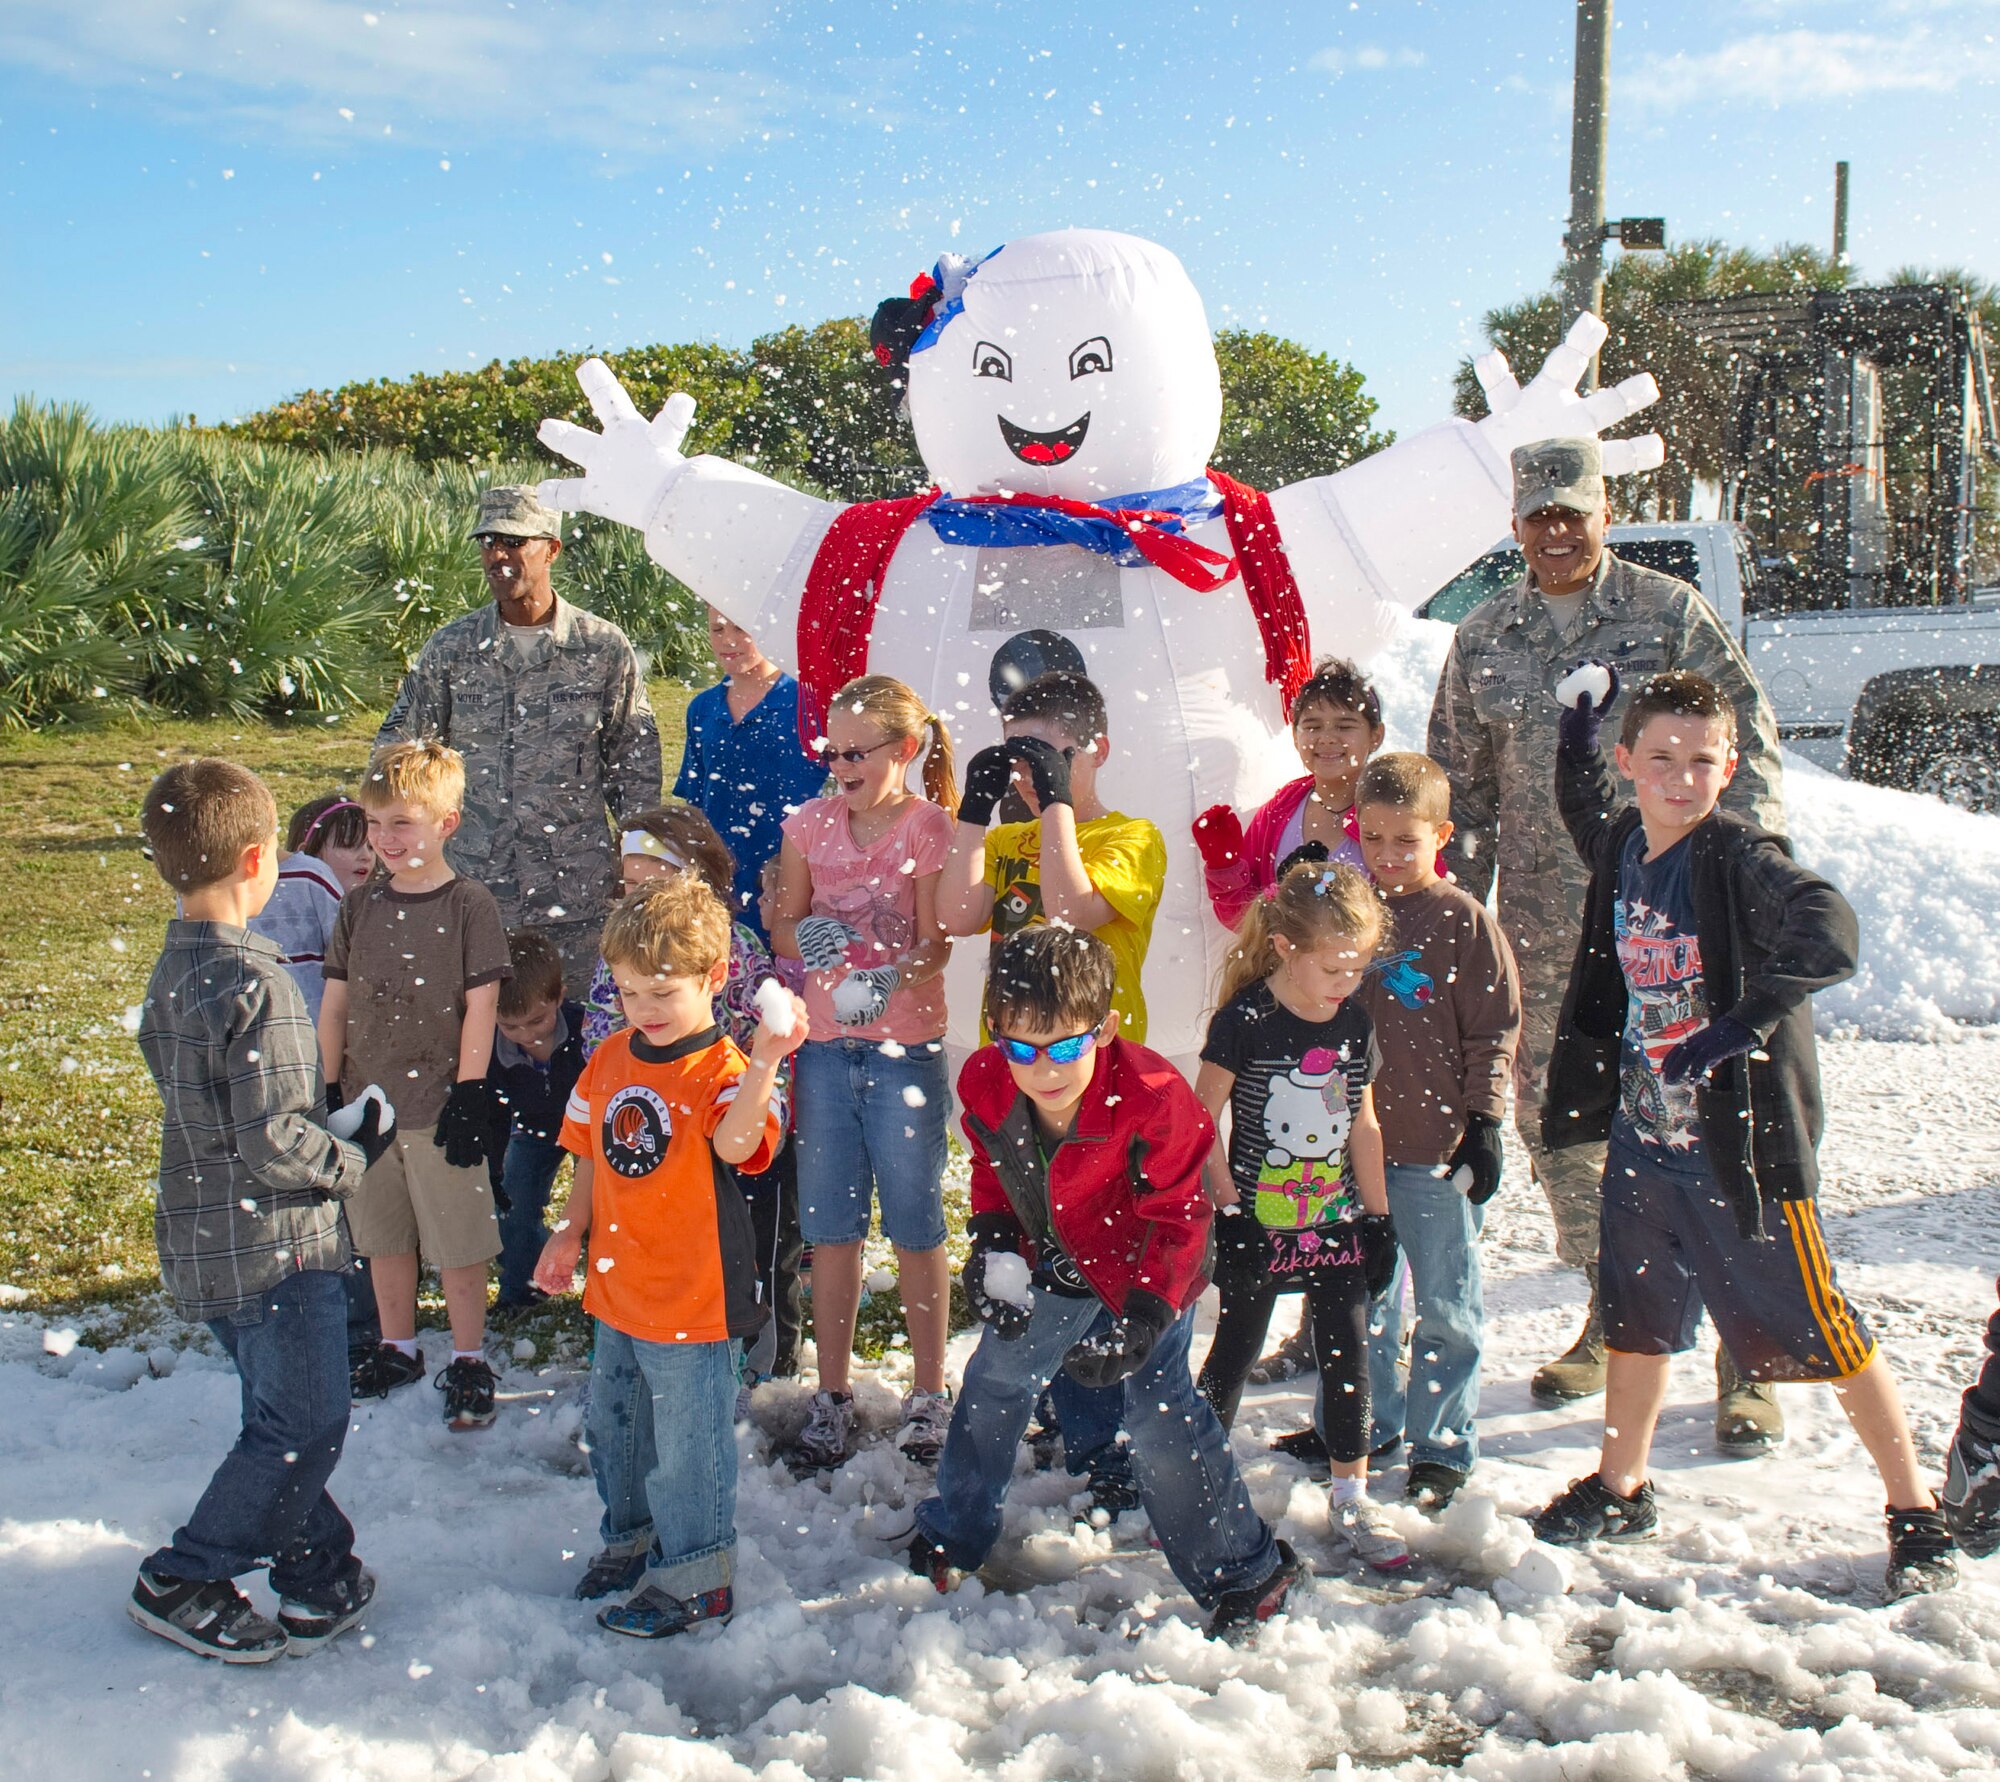 Brig. Gen. Anthony Cotton, commander, 45th Space Wing, and Chief Master Sgt. Herman Moyer, wing command chief, 45th Space Wing, enjoy real snow at the 45th Space Wing Holiday Party hosted by the 45th Force Support Squadron at the Tides Dec. 14, 2012. 